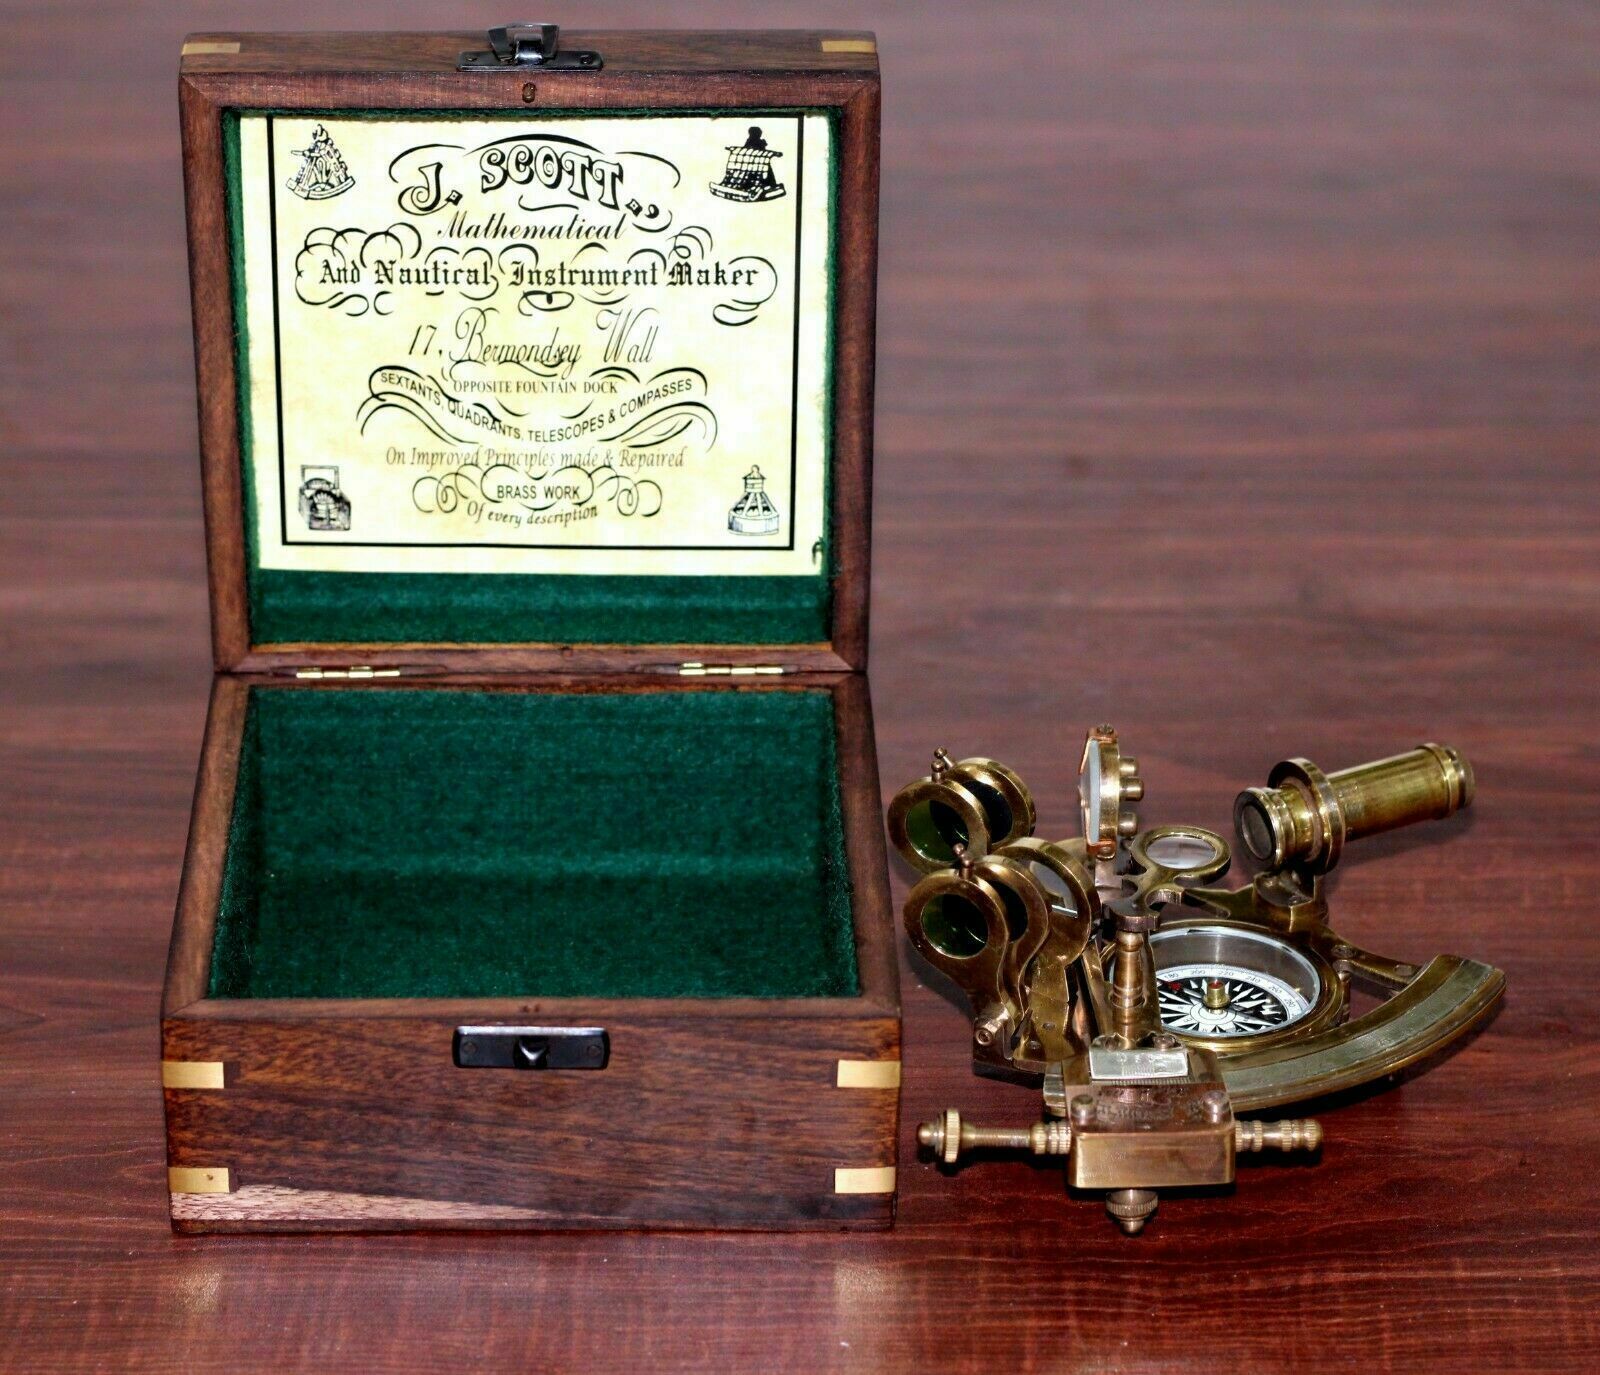 ANTIQUE WORKING VINTAGE NAUTICAL GERMAN MARINE BRASS SEXTANT WITH WOODEN BOX